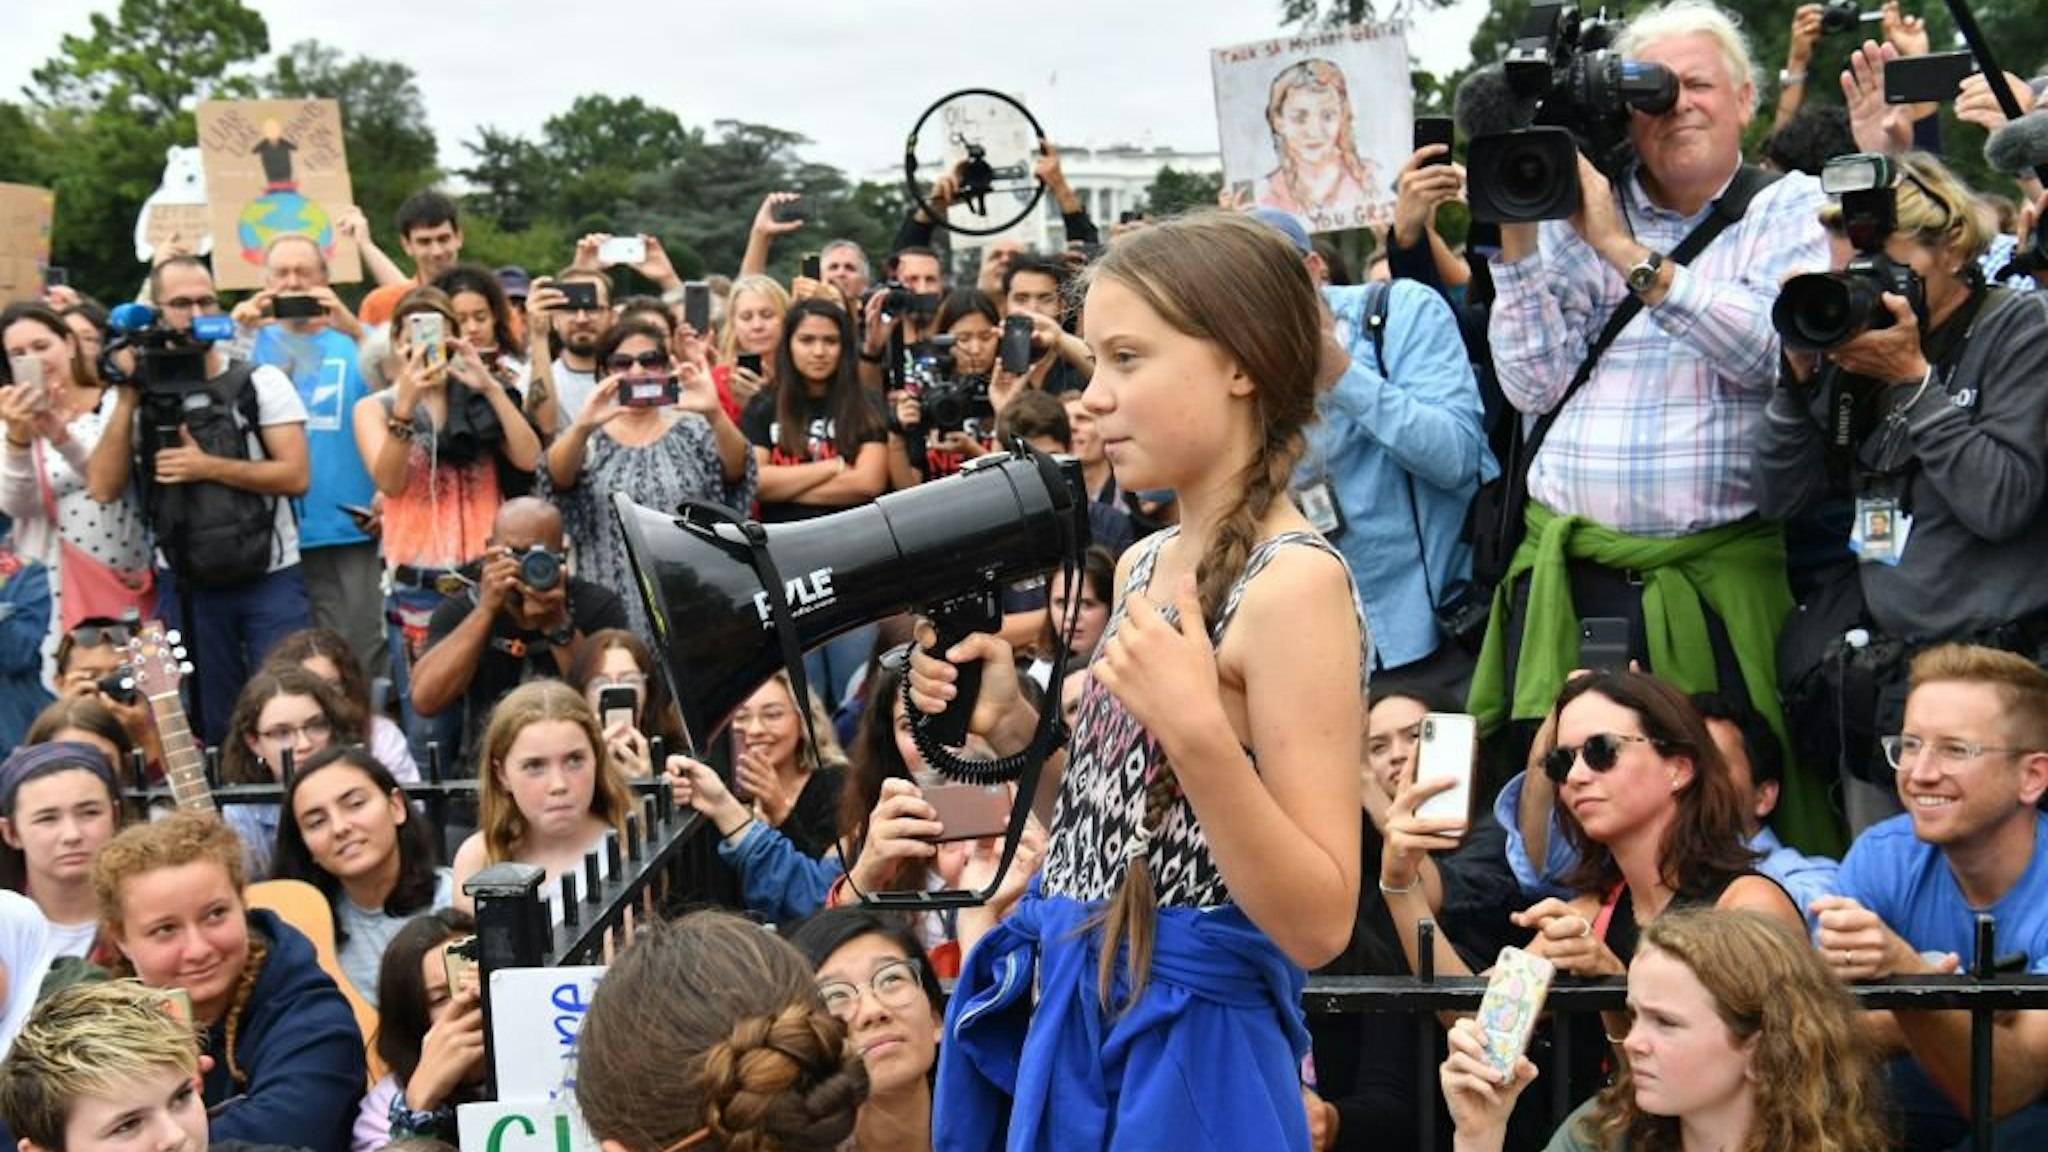 Swedish environment activist Greta Thunberg speaks at a climate protest outside the White House in Washington, DC on September 13, 2019.